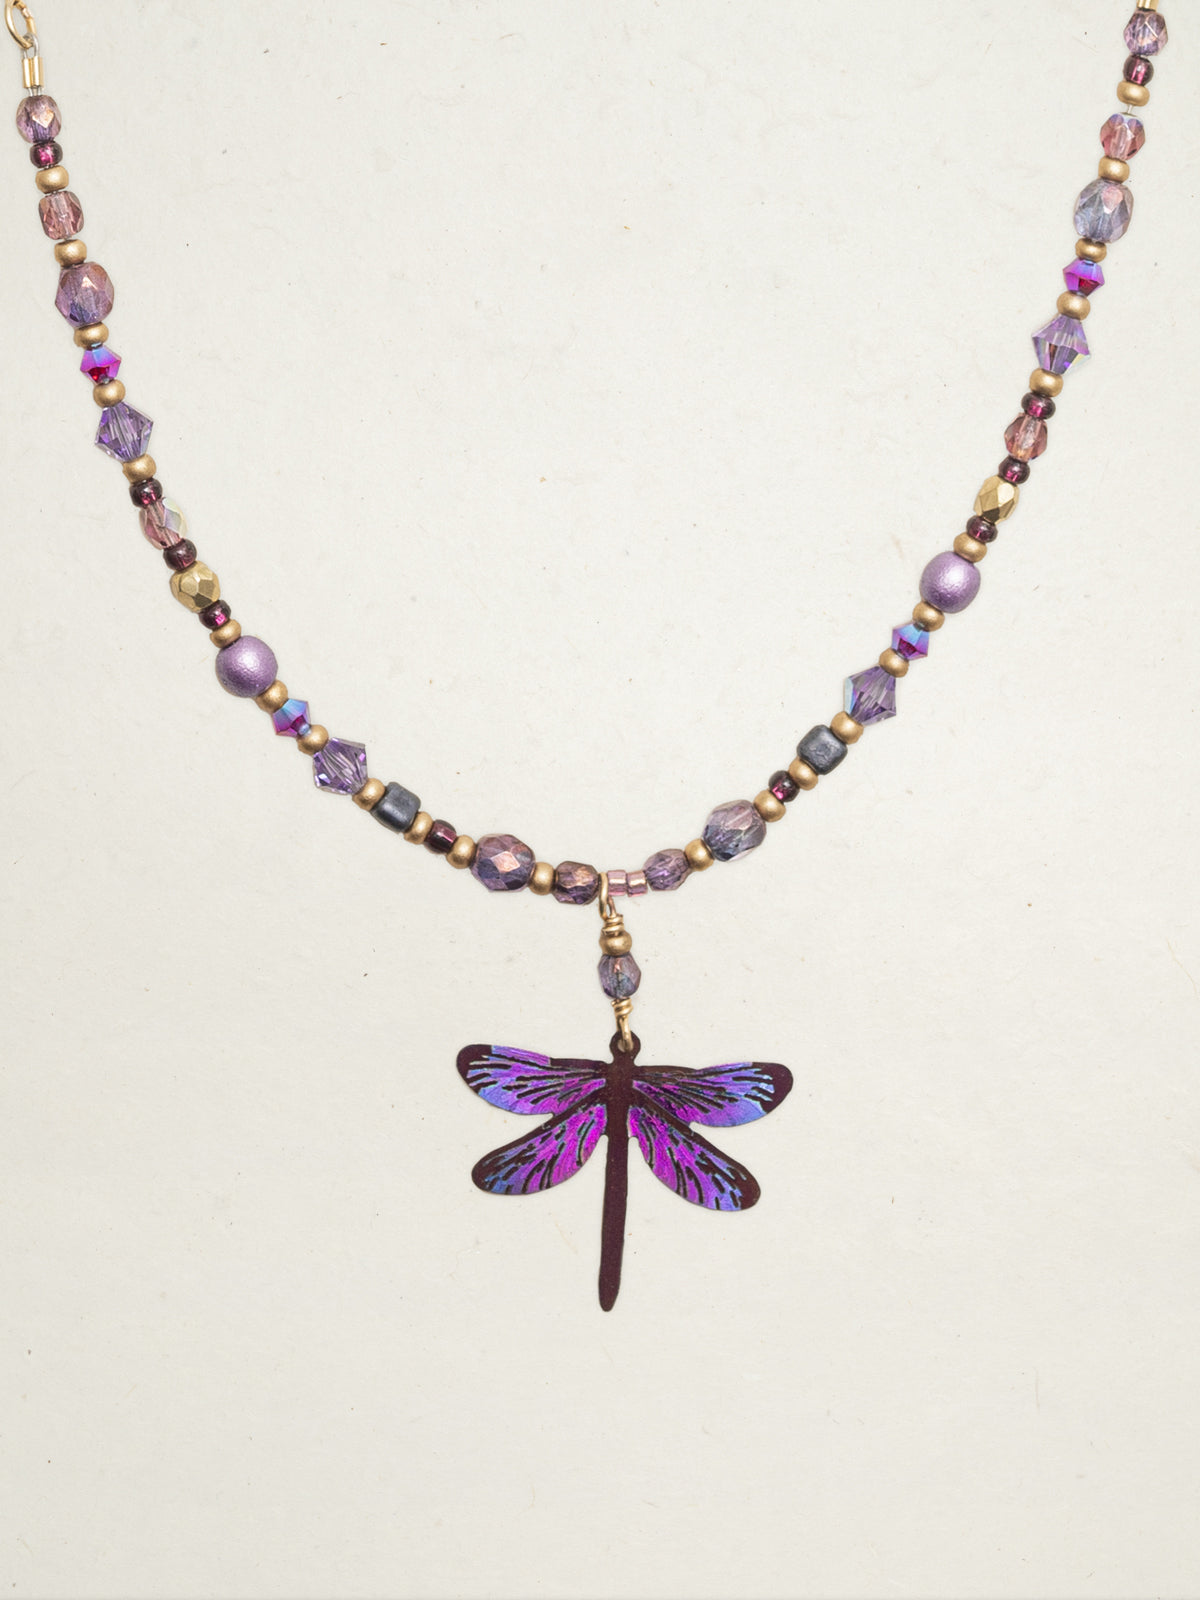 Violet Skies Dragonfly Dreams Beaded Necklace